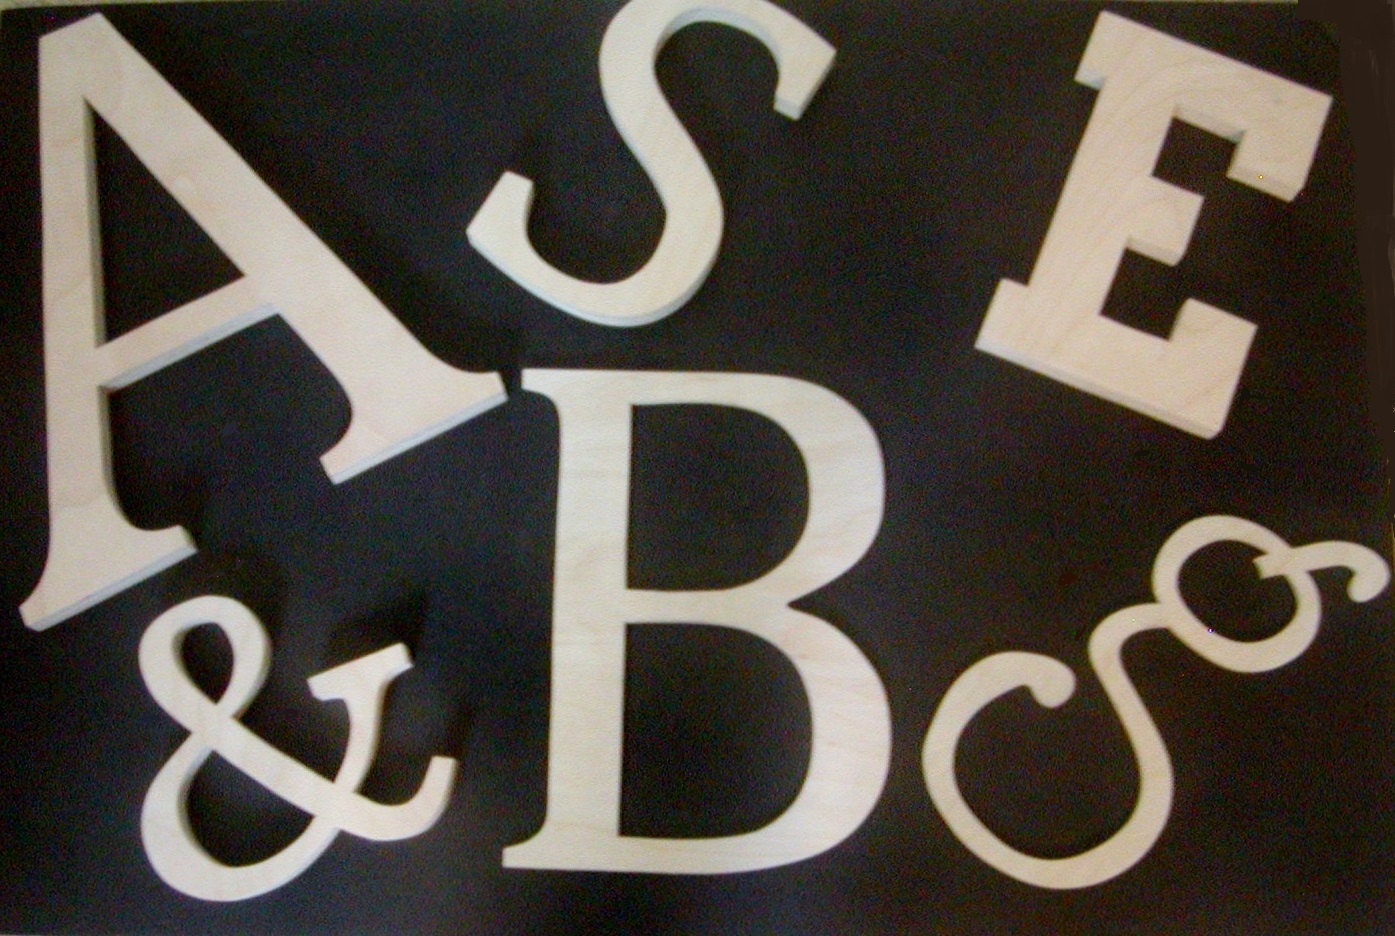 Unfinished Wooden Letters, Sizes 10, 11, 12", 13", 14", 15" - Unpainted Letters, Wood Wall Letters"